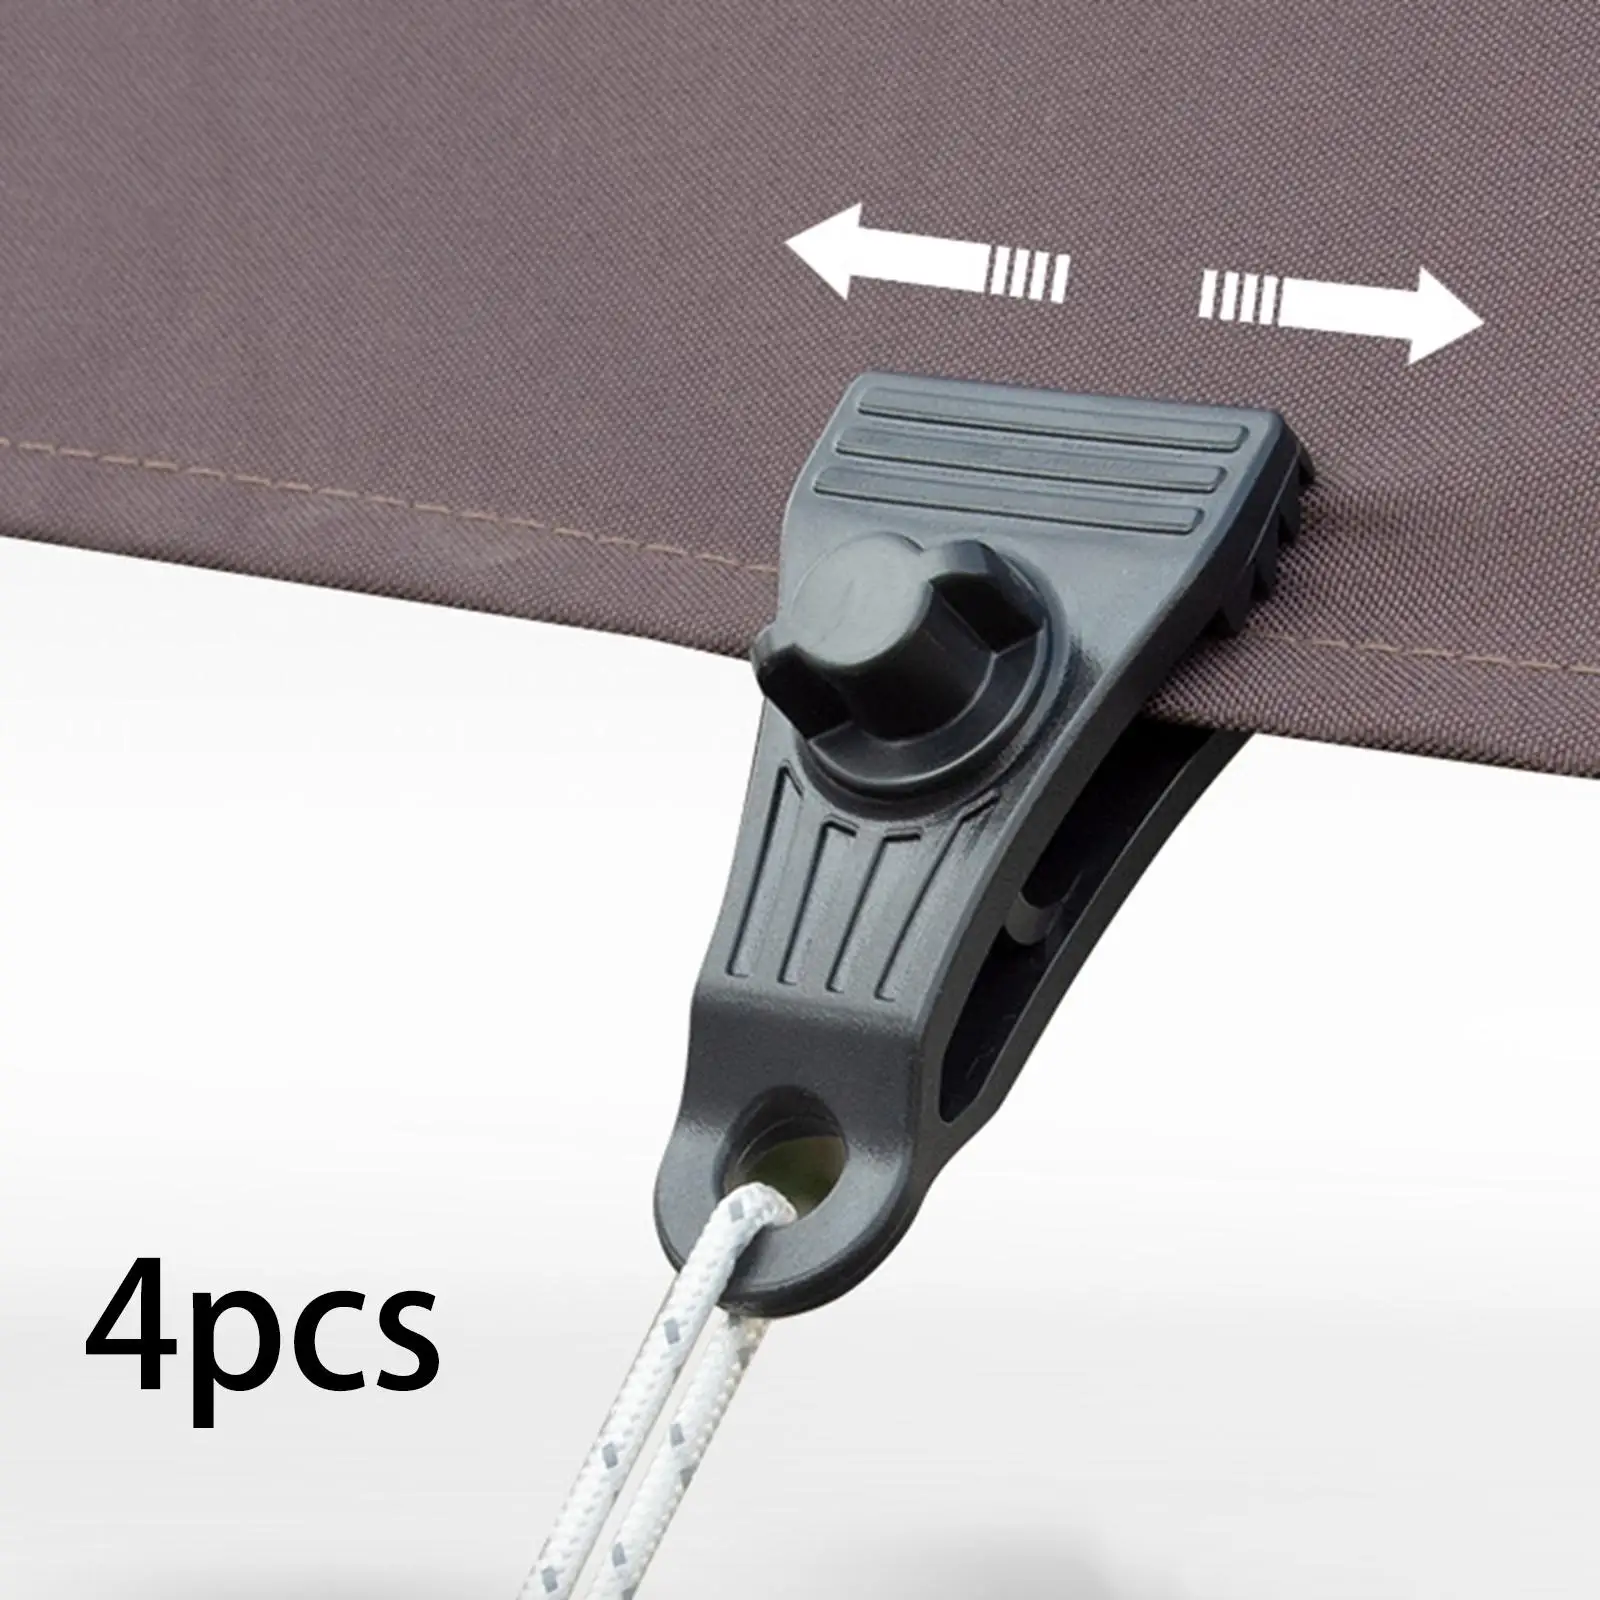 

4 Pieces Heavy Duty Tarp Clips Tent Clamps Adjustable Rotation Tightness Practical Tent Clips Canopies Clamps for Boat Covers